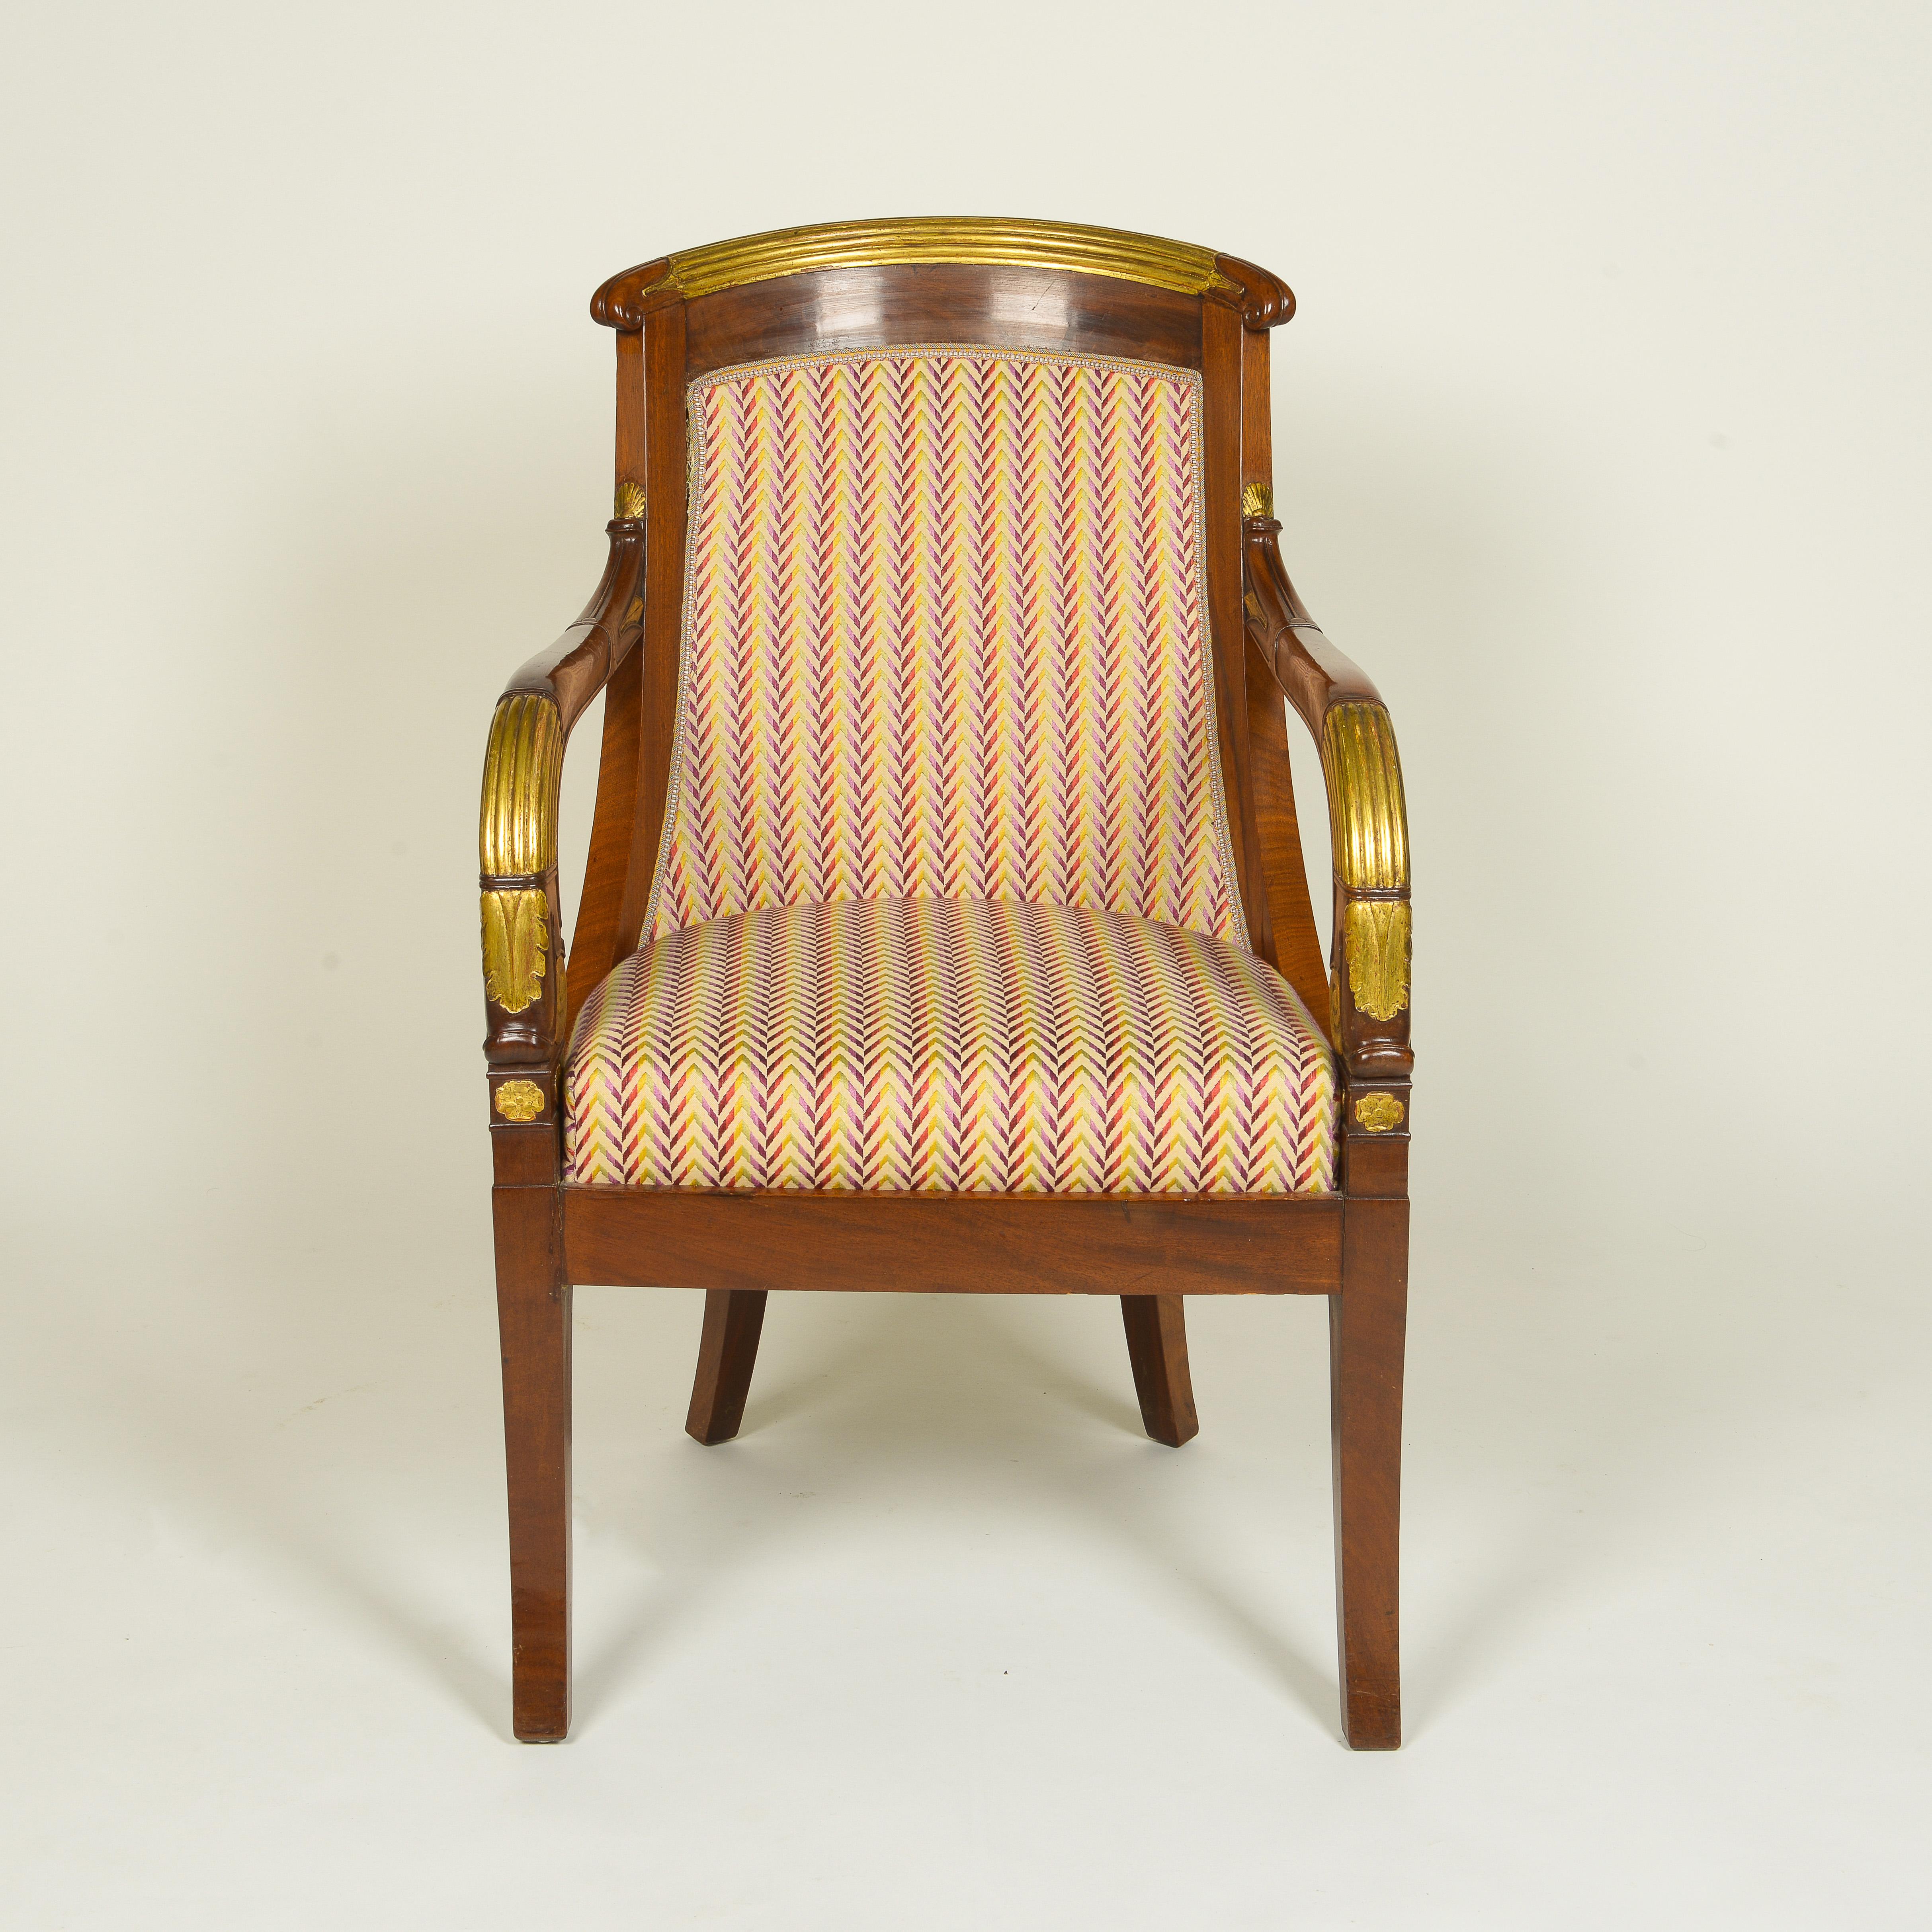 The tub-form padded back covered in a herringbone rainbow silk jacquard with reeded gilt crest rail terminating in scrolls and issuing two Downs-swept arms with gilt reeding and foliate embellishments; the upholstered seat over a deep seat rail on